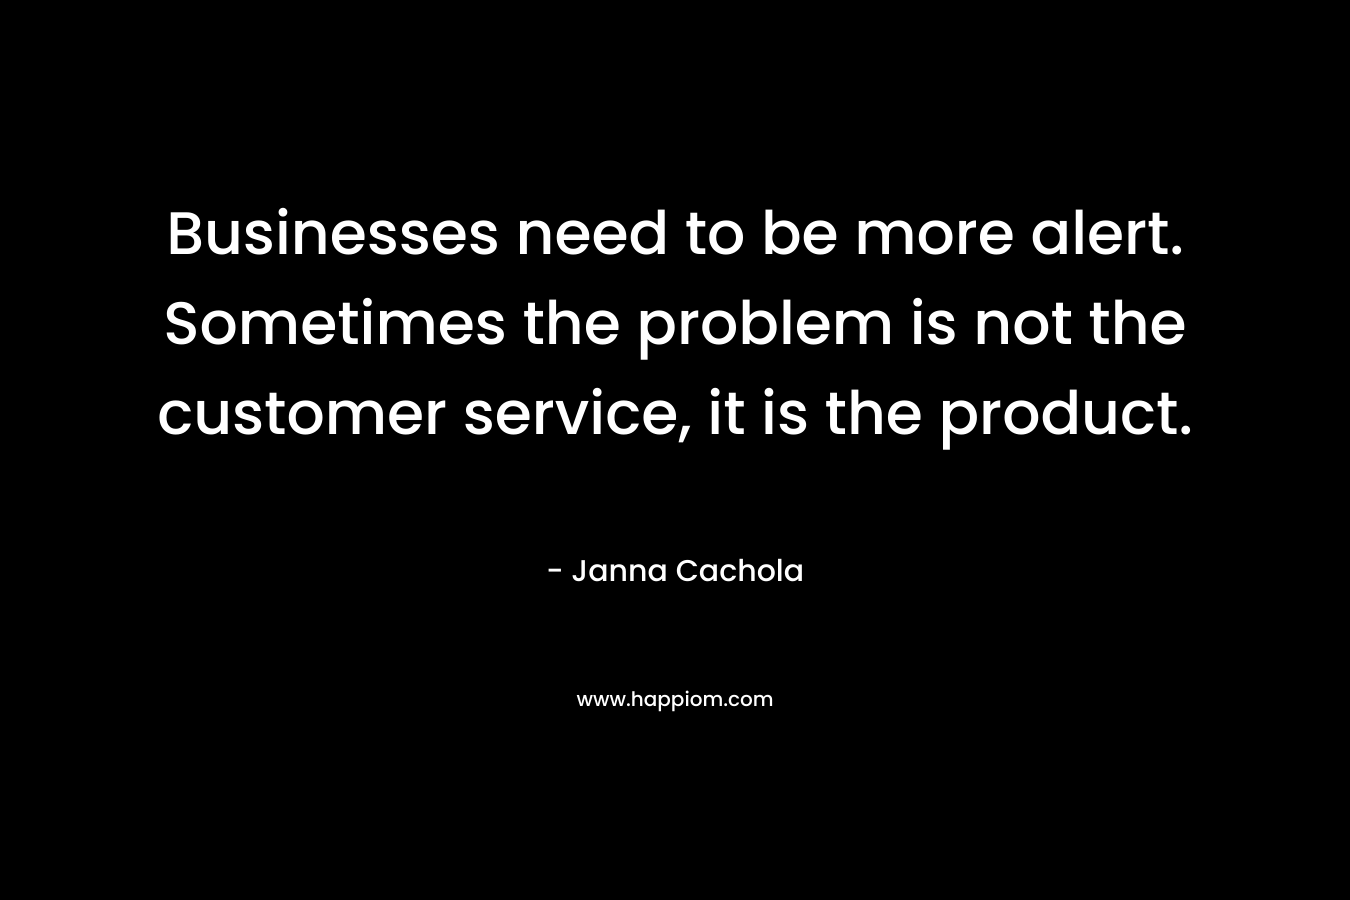 Businesses need to be more alert. Sometimes the problem is not the customer service, it is the product.